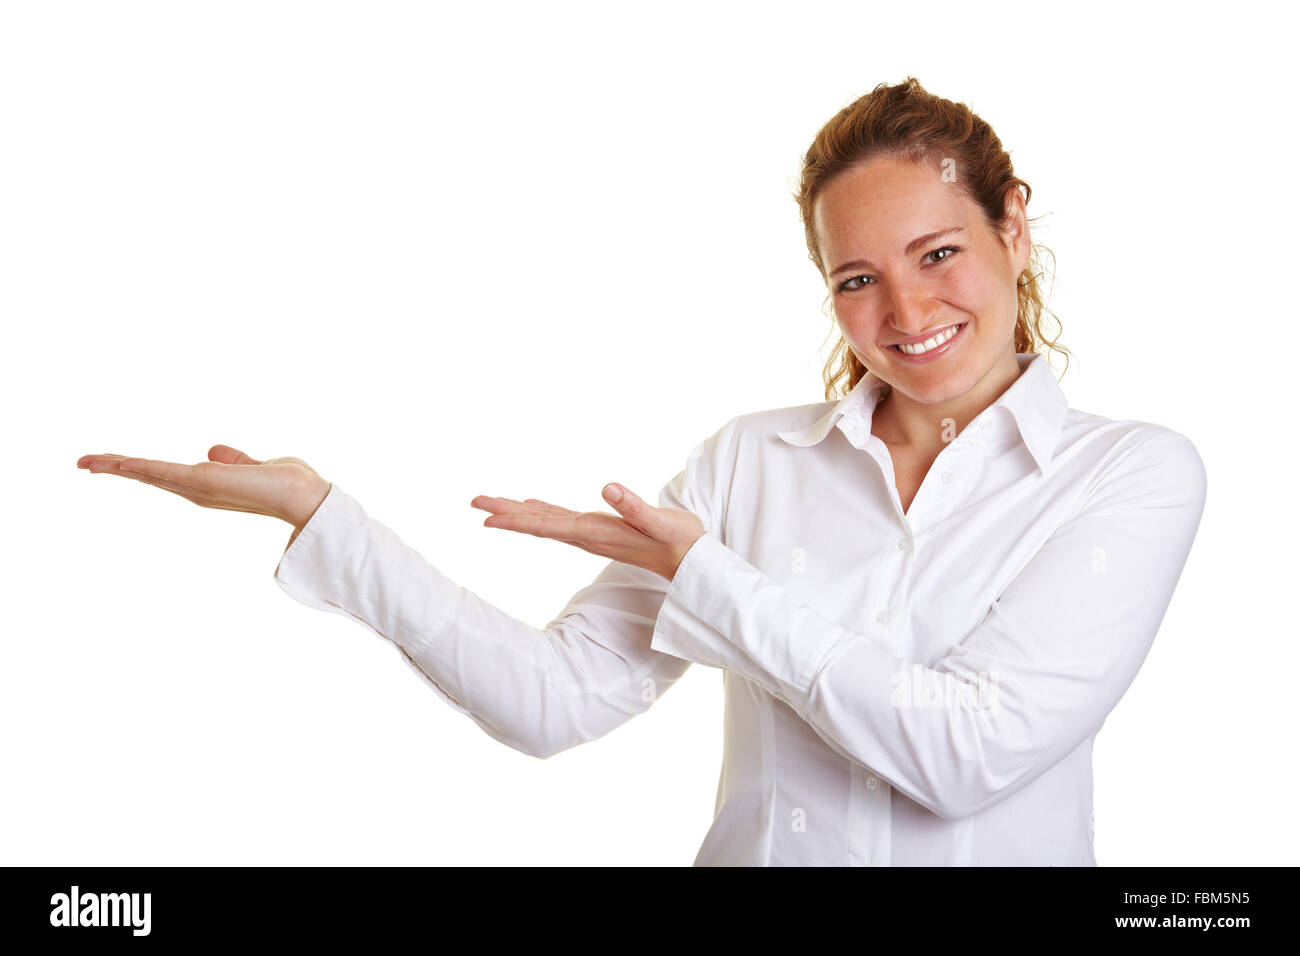 Happy business woman showing imaginary product with her hands Stock Photo